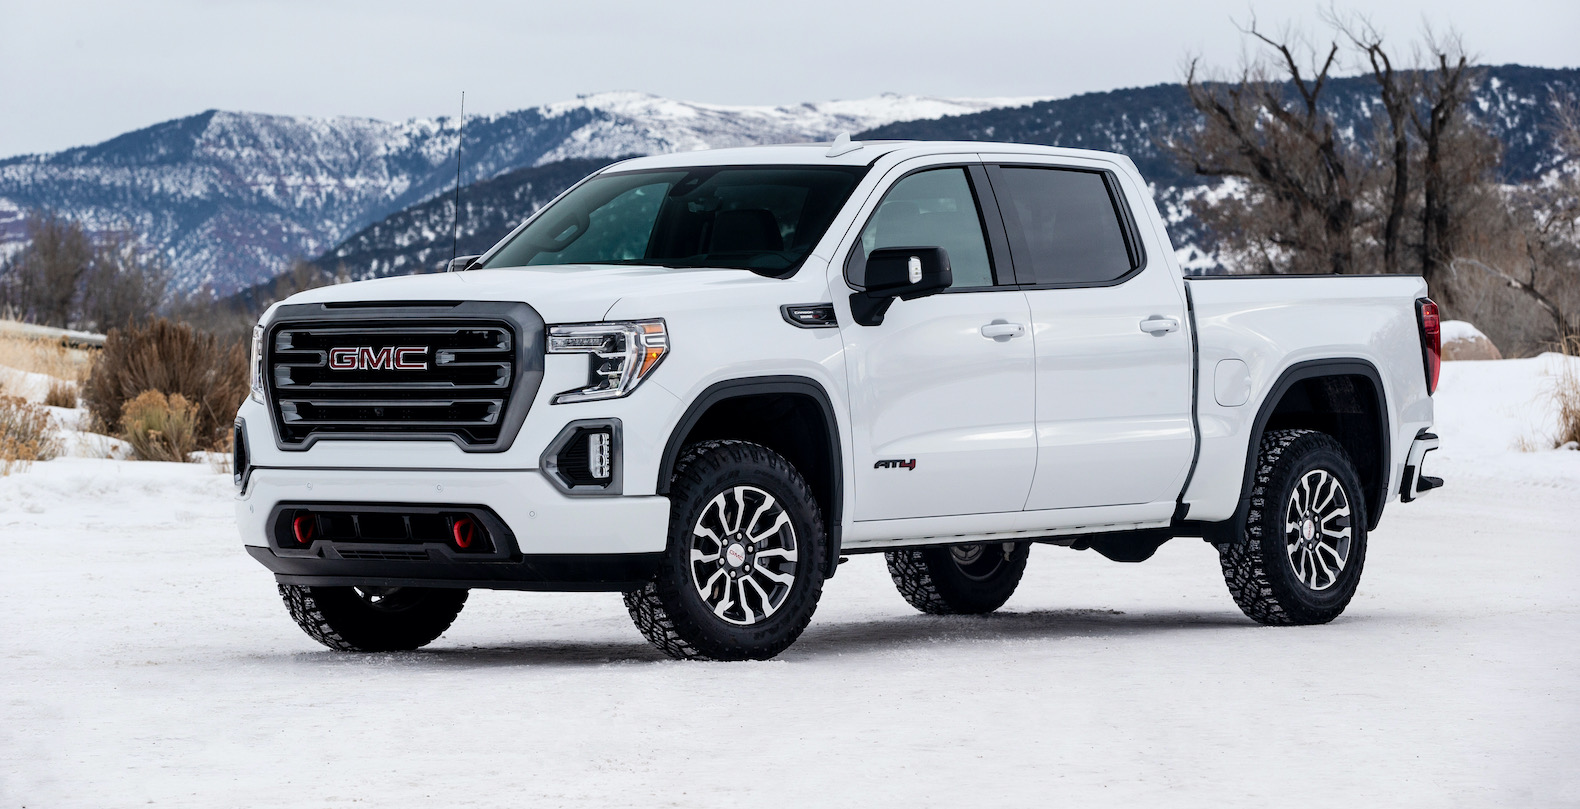 2020 GMC Sierra Review: A truck for everyone - The Torque Report